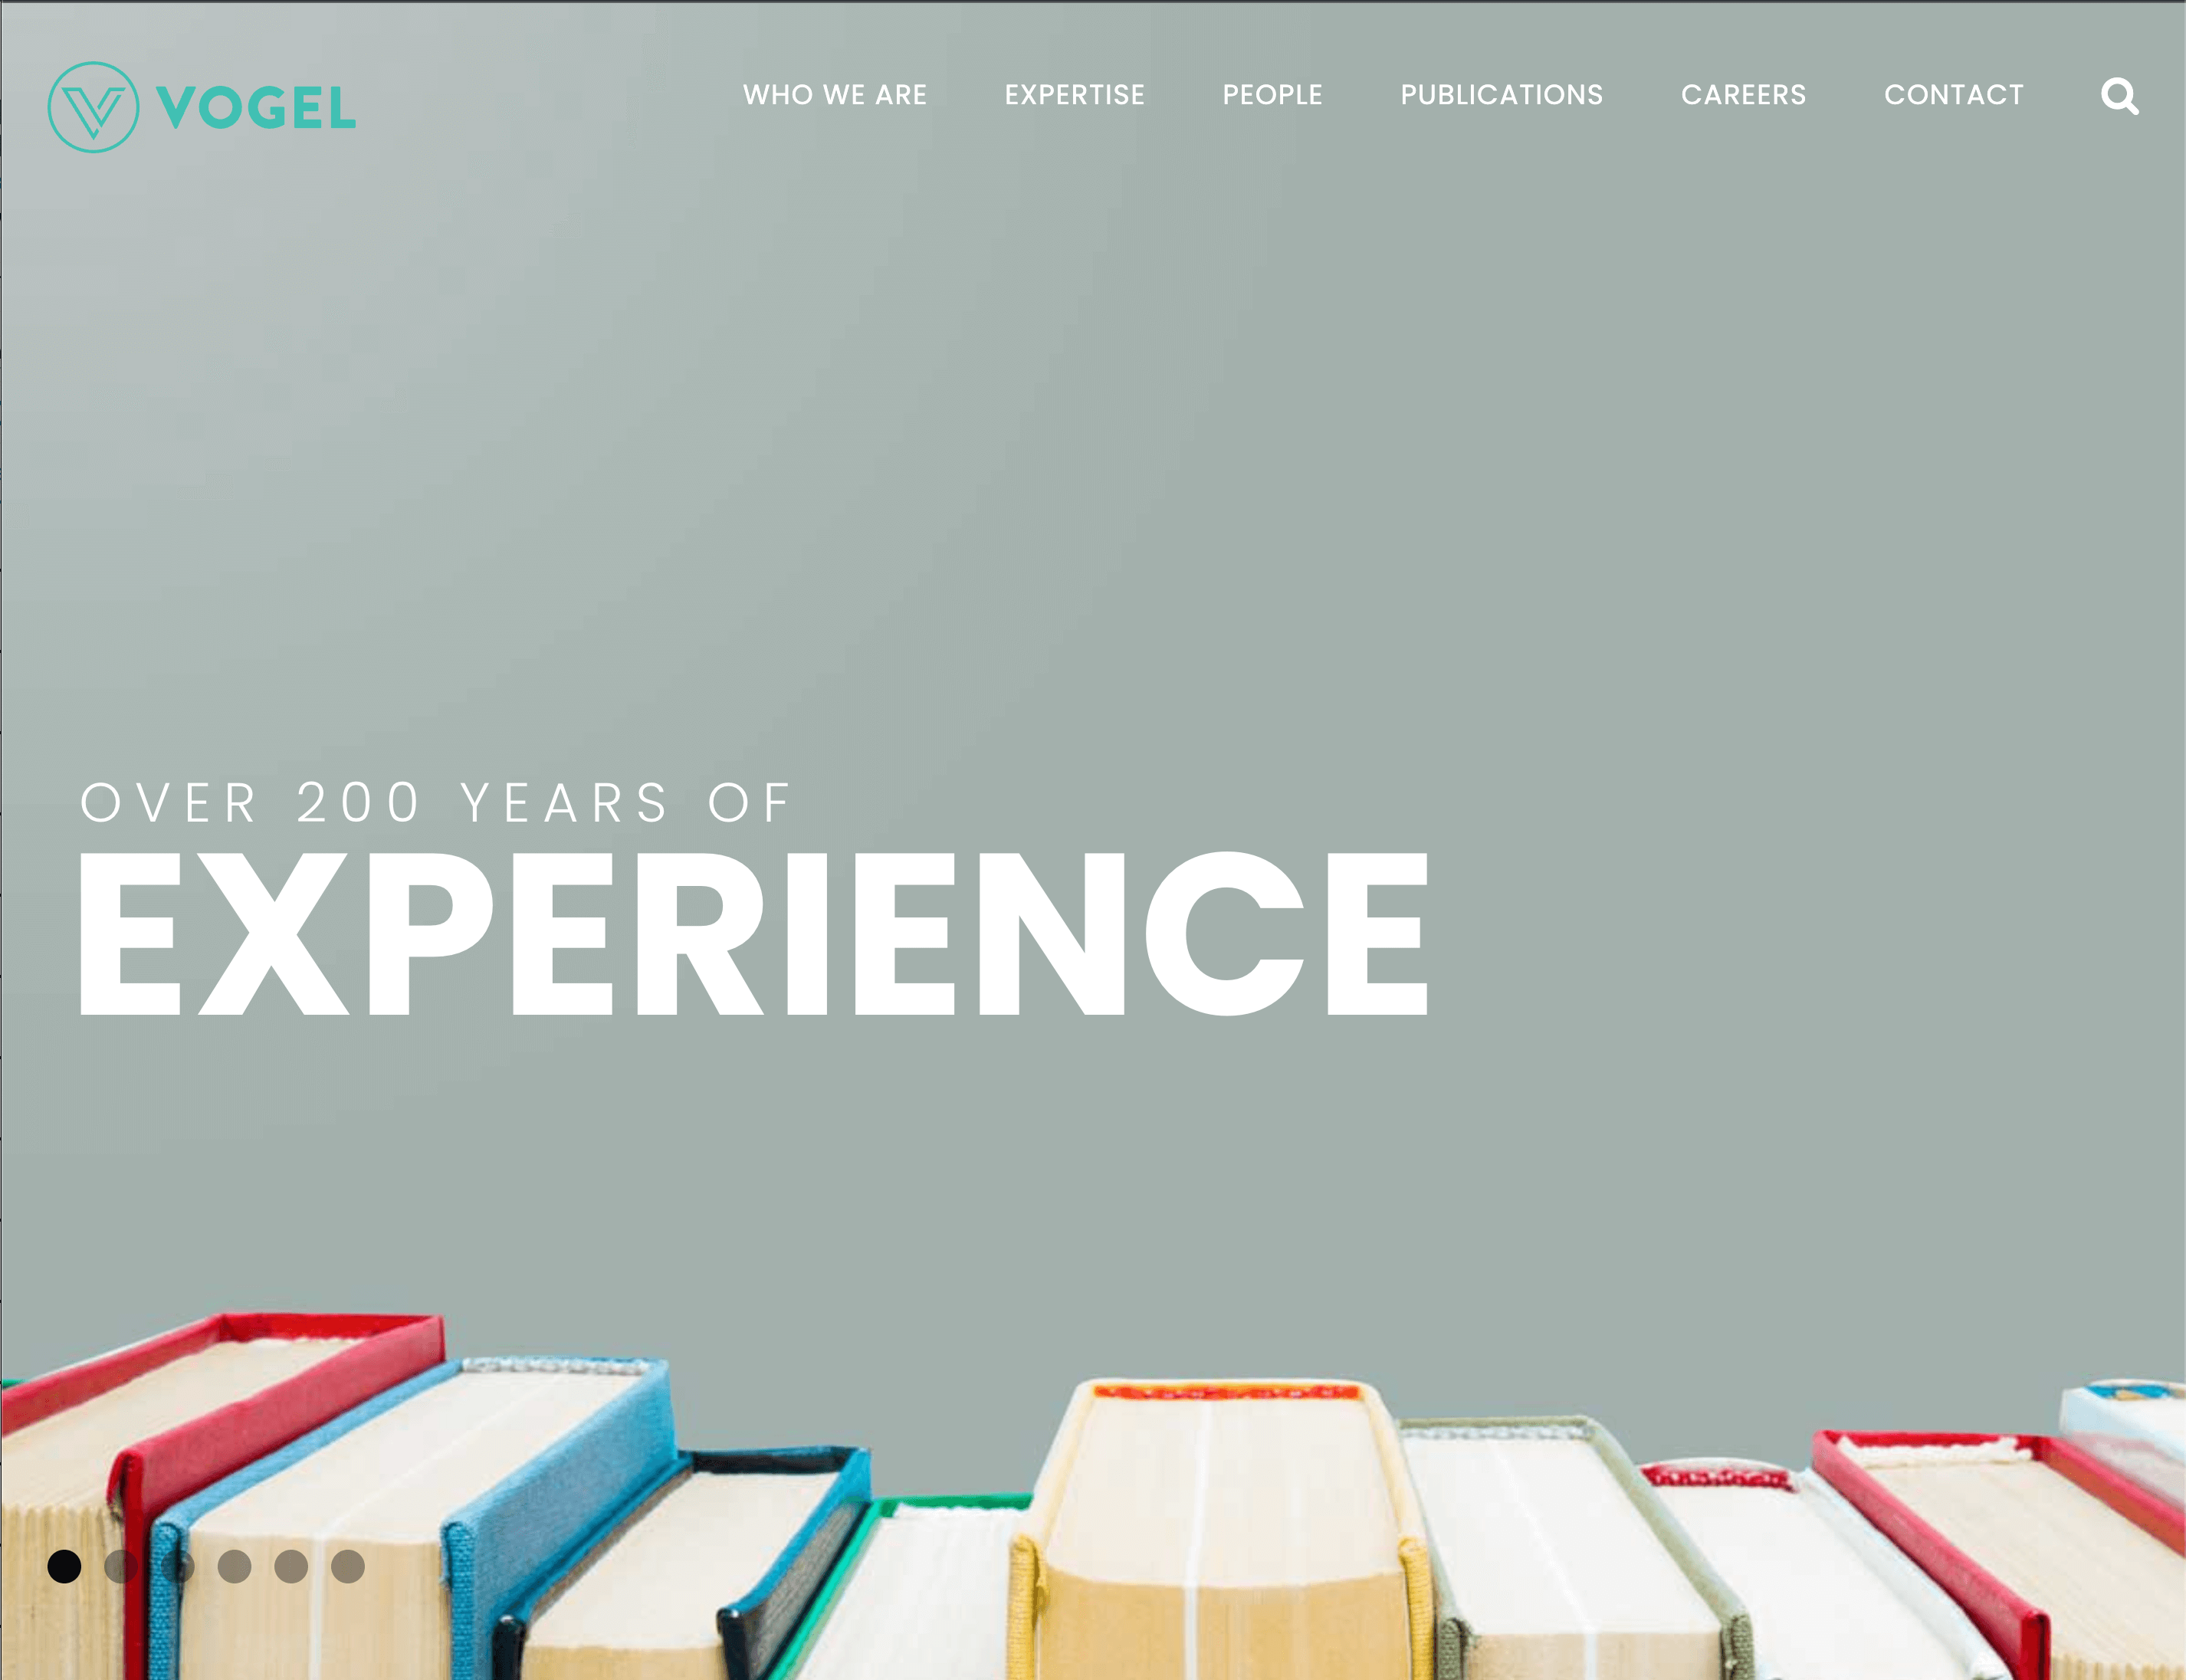 Vogel's homepage featuring a row of books and the words "over 200 years of experience